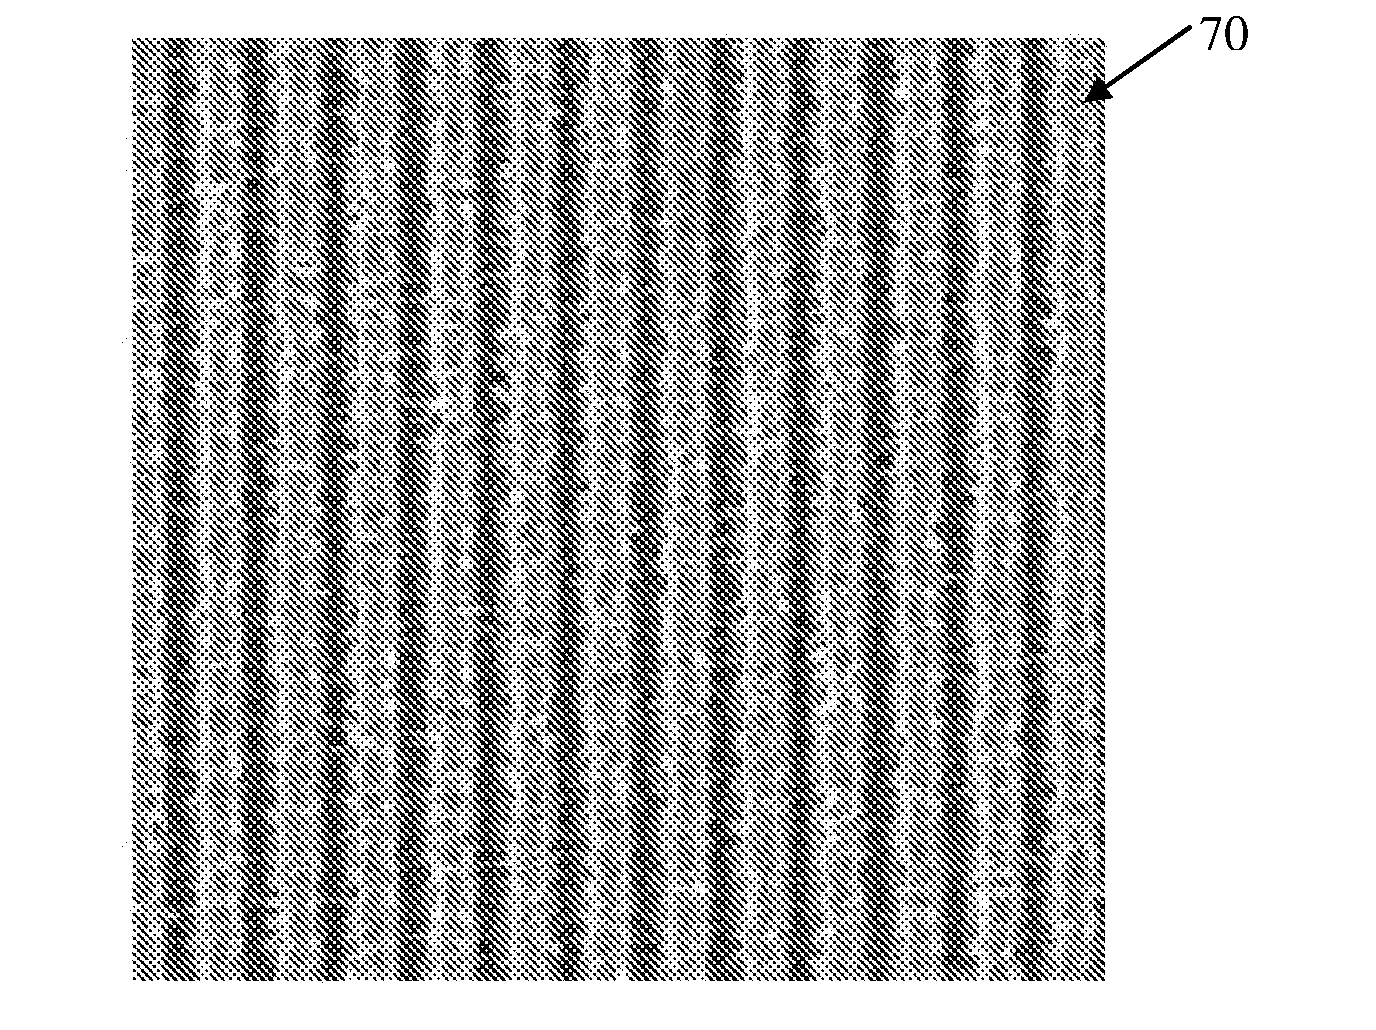 Nanopatterned biopolymer optical device and method of manufacturing the same